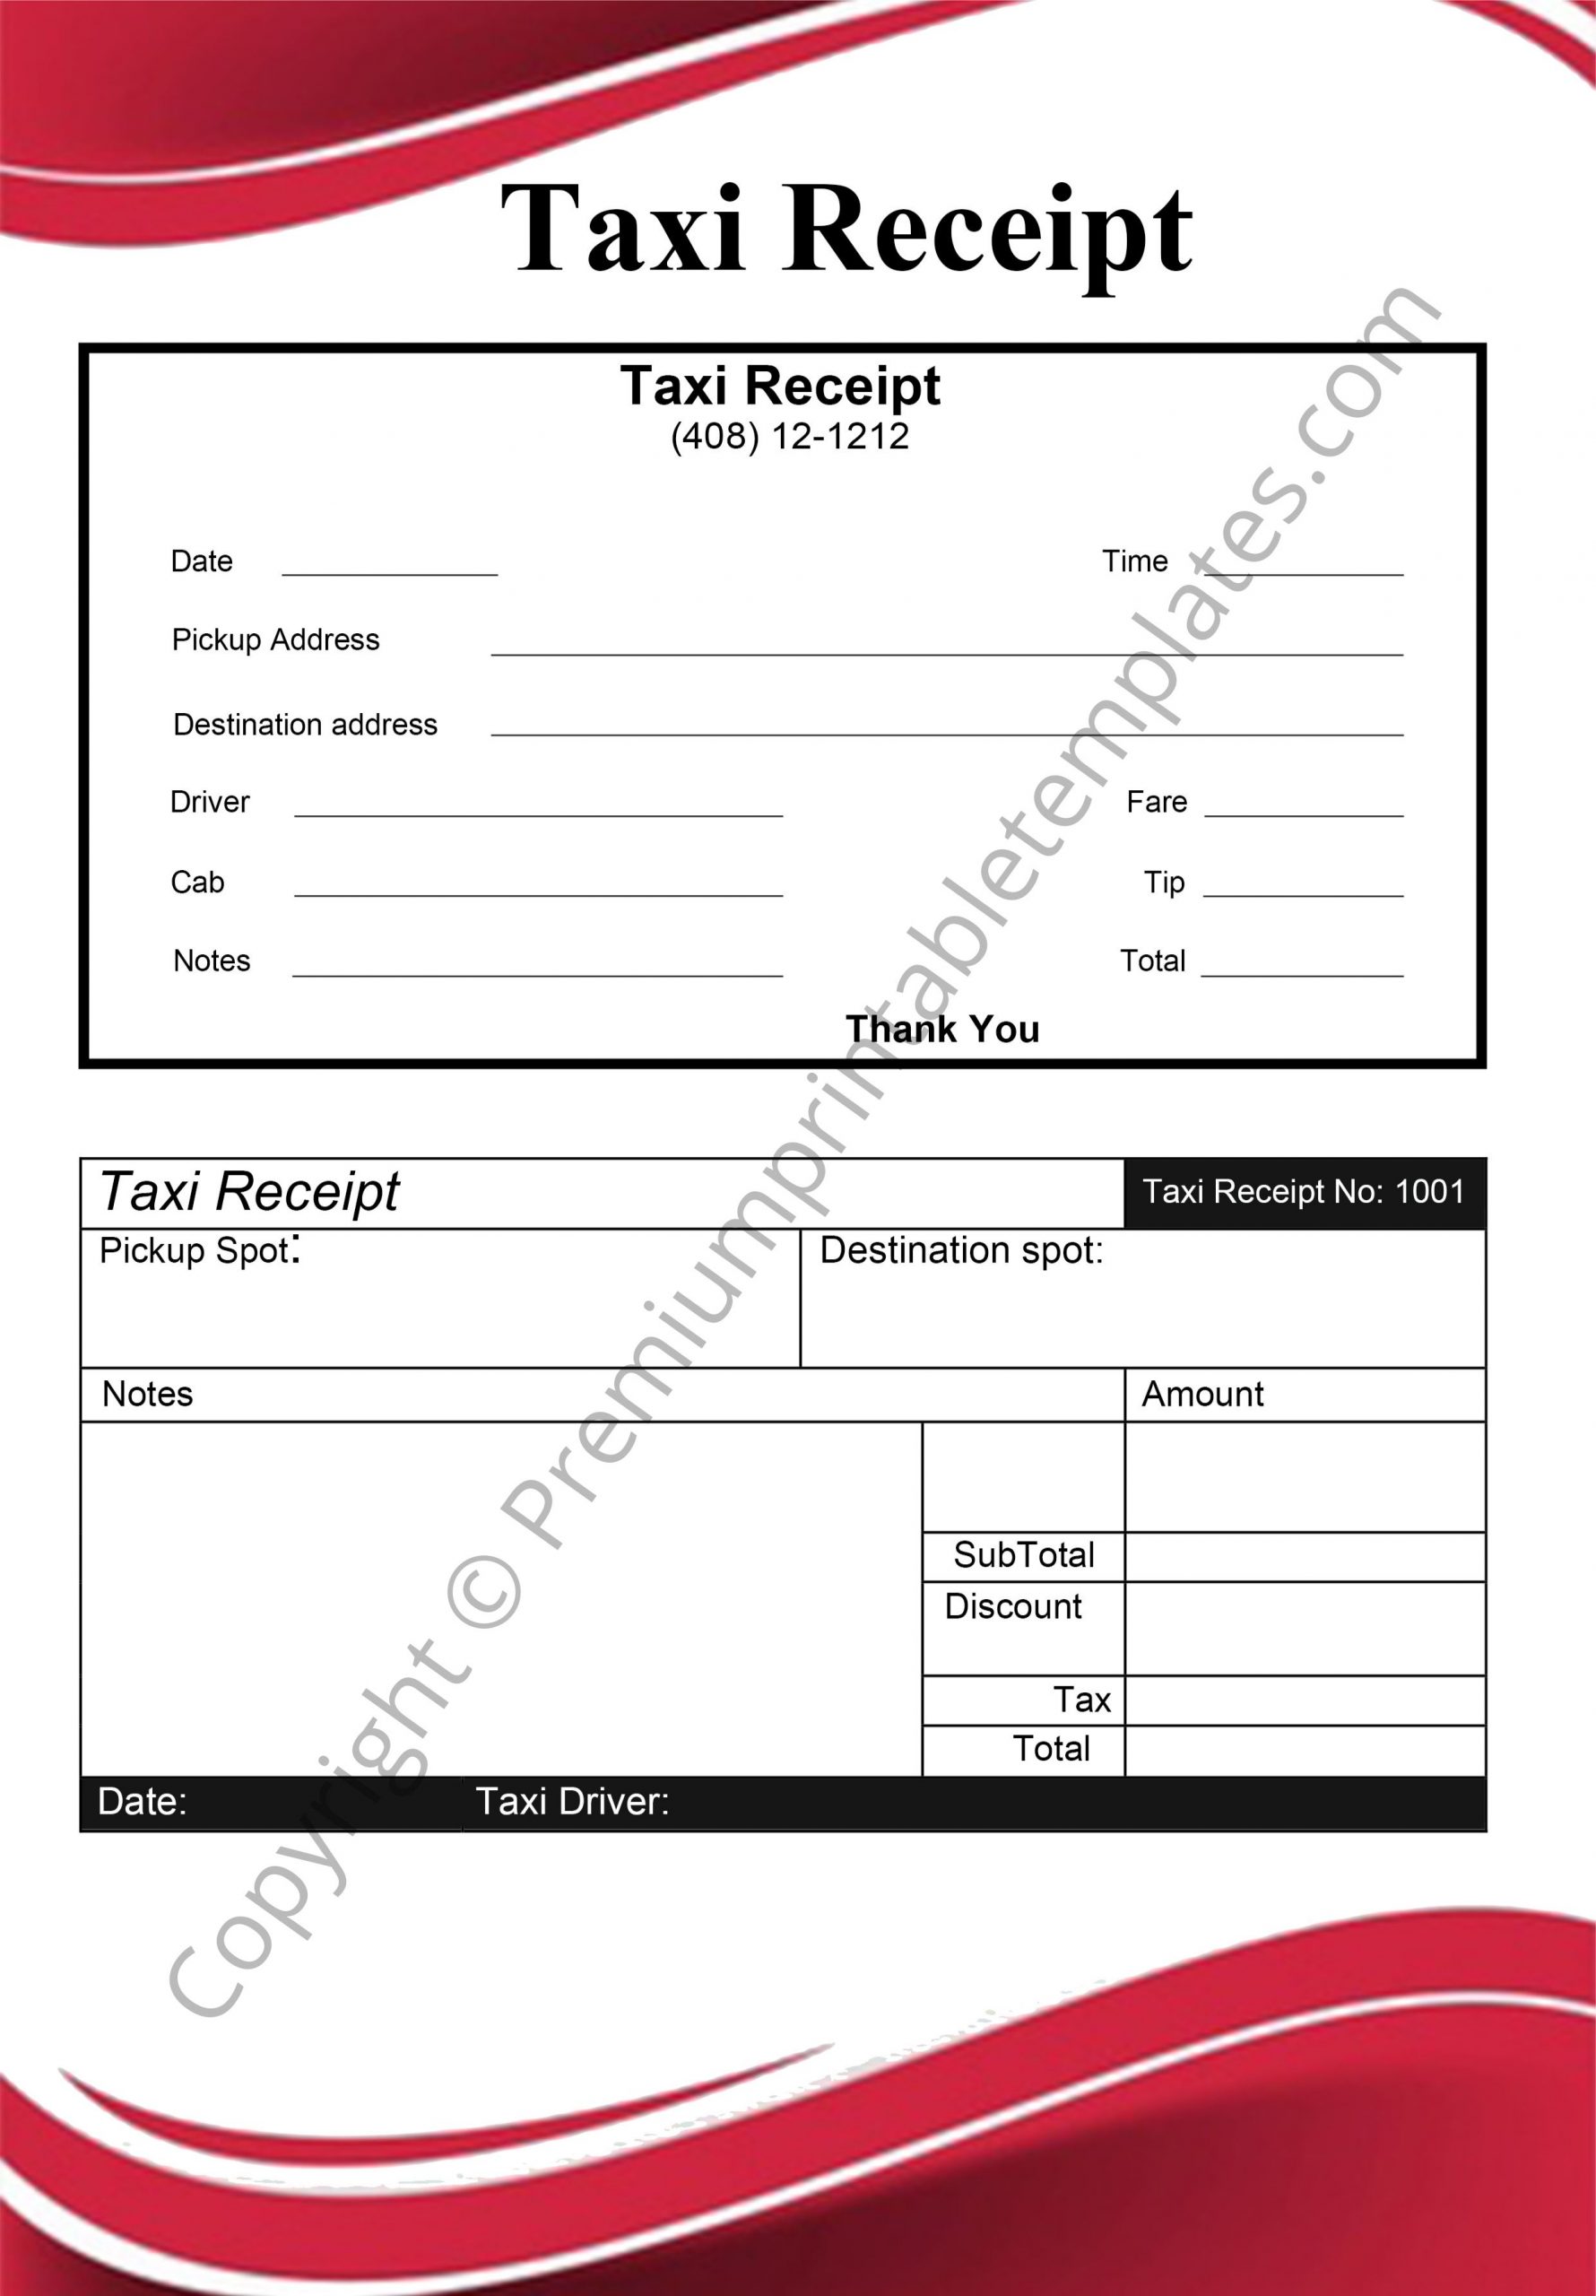 Taxi Receipt Printable Template in PDF & Word [Pack of 5]